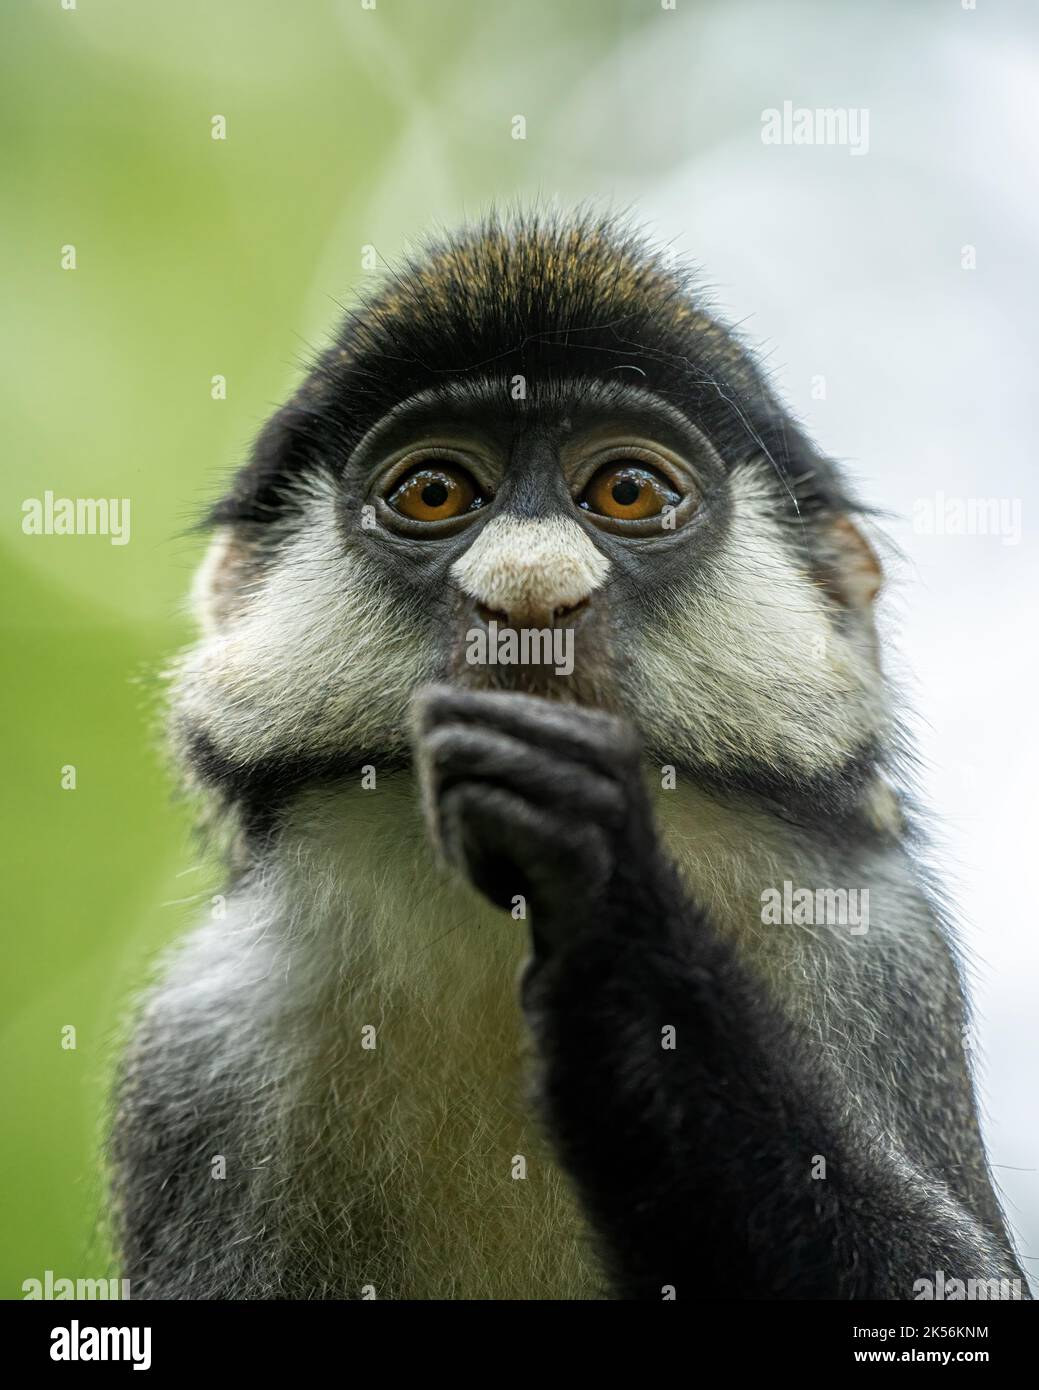 Portrait of a young red-tailed monkey Stock Photo